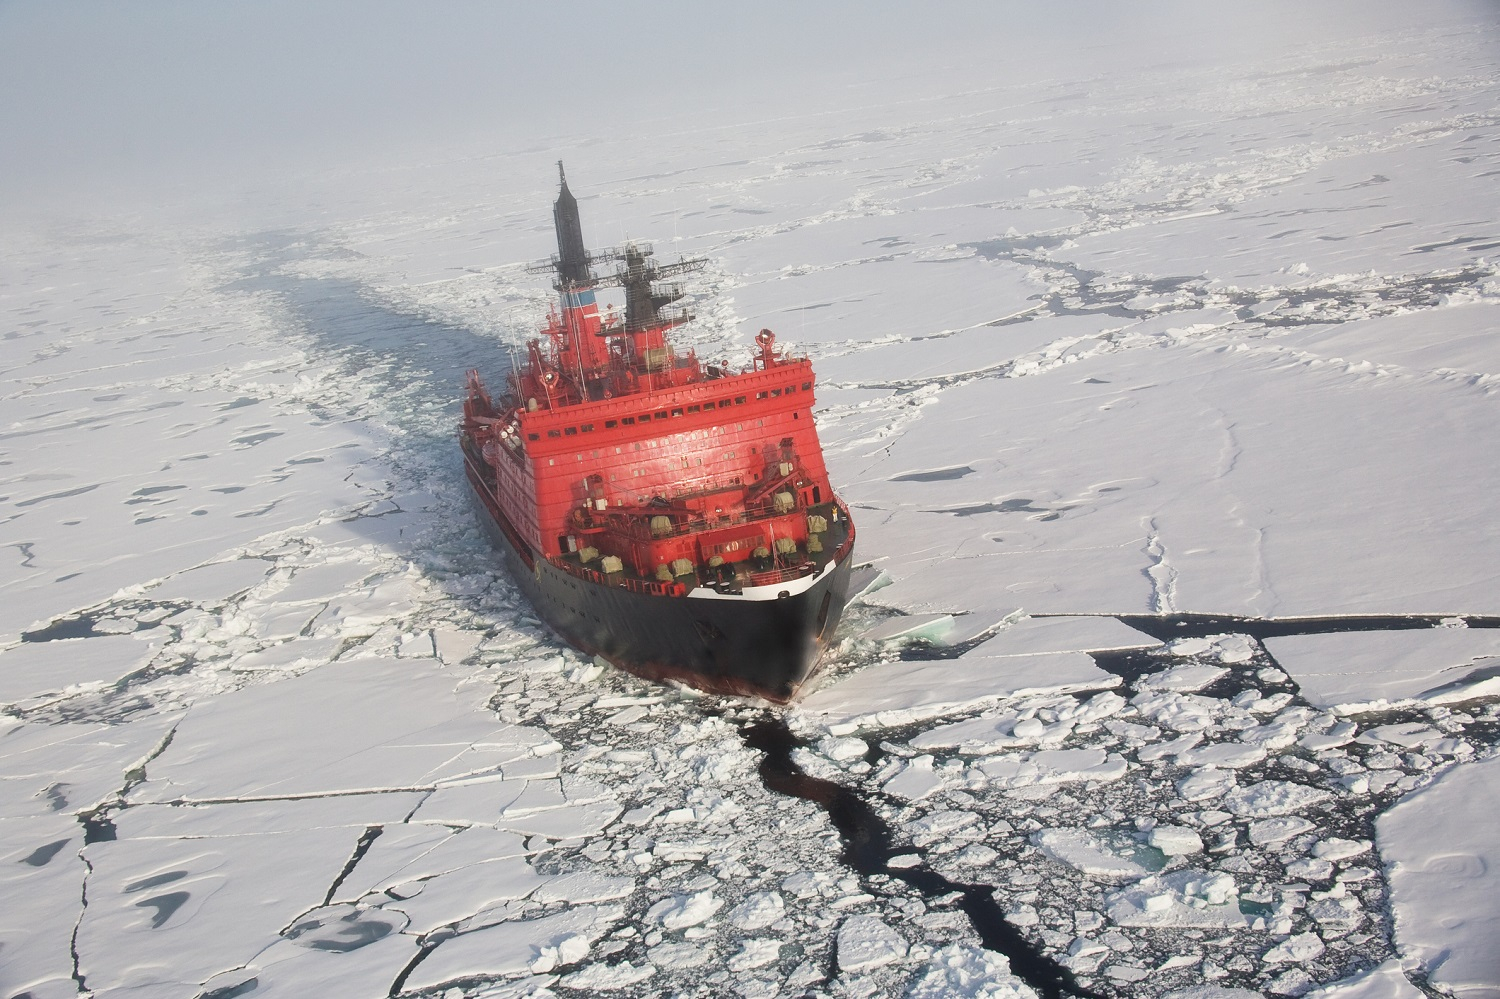 An aerial shot from a helicopter of a Russian nuclear ice breaker heading to the North pole through pack ice.